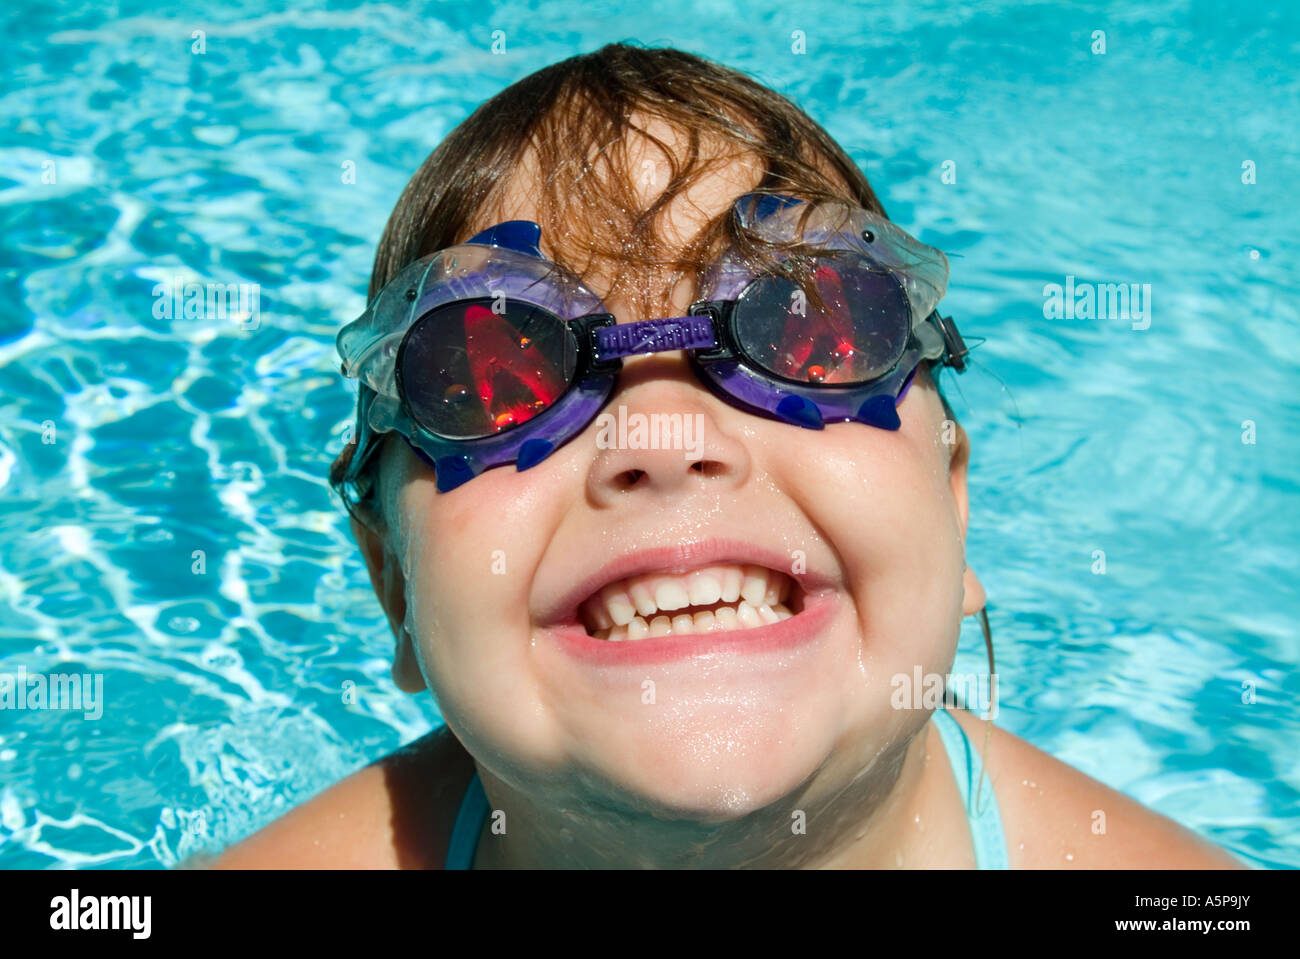 Girl laughing and playing in swimming pool. Stock Photo